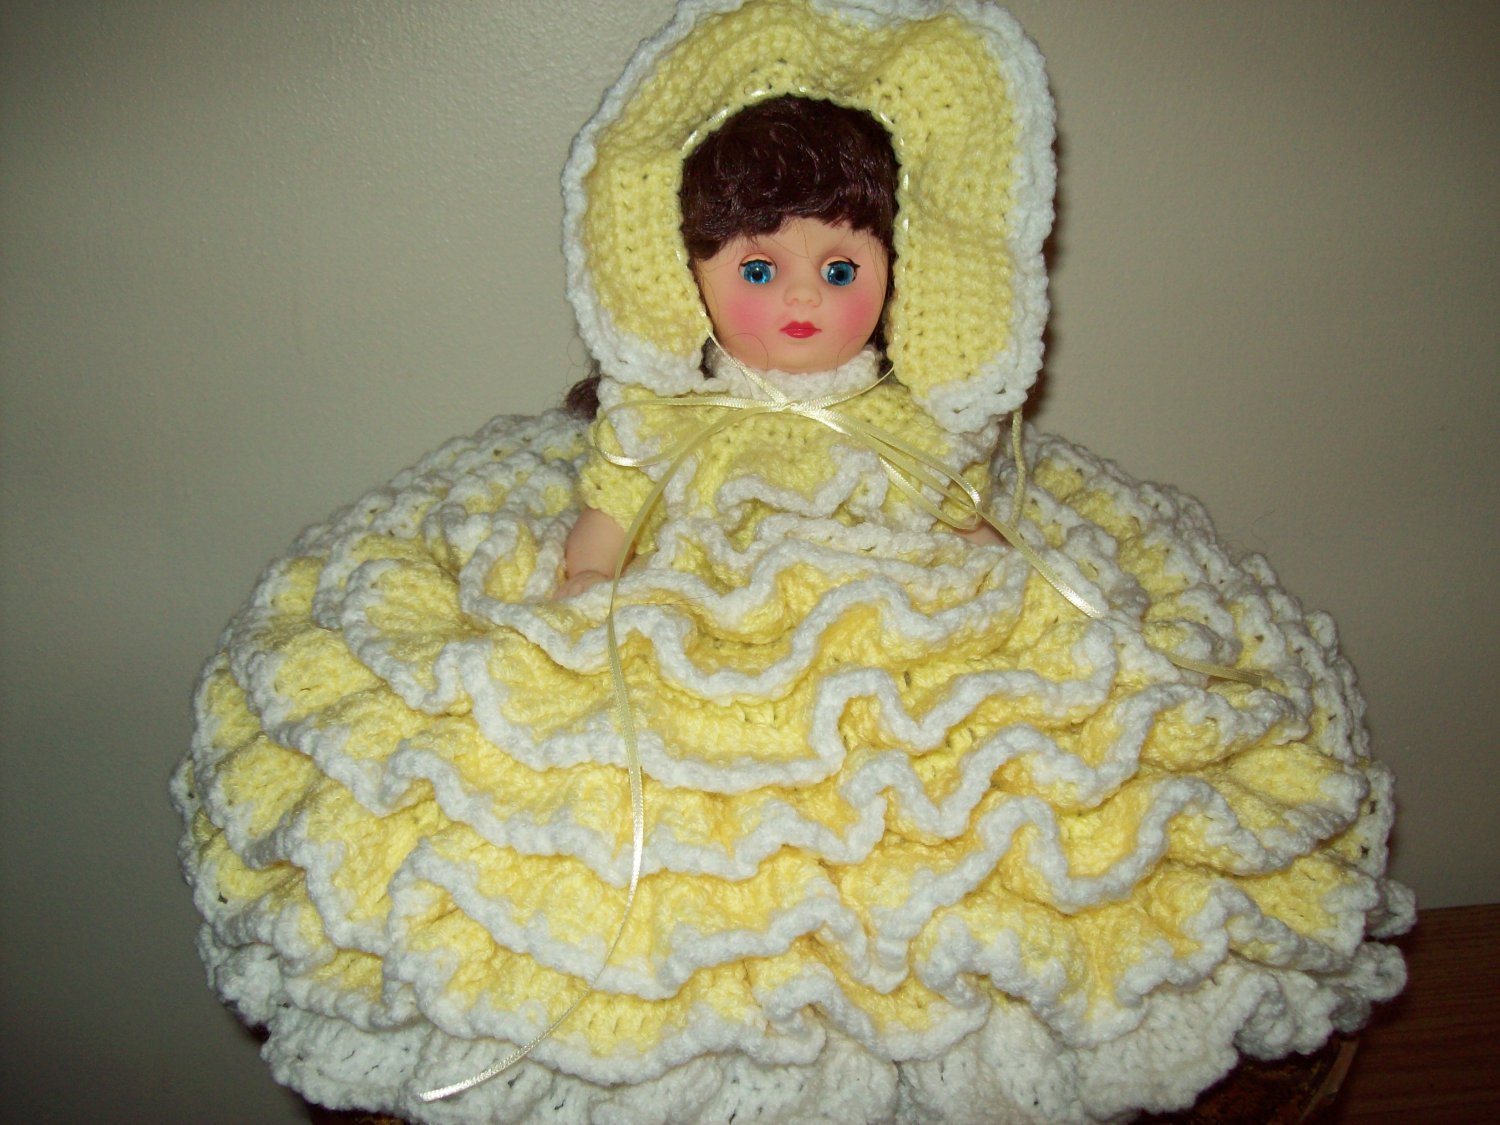 17-best-images-about-crochet-bed-dolls-on-pinterest-doll-patterns-free-free-pattern-and-doll